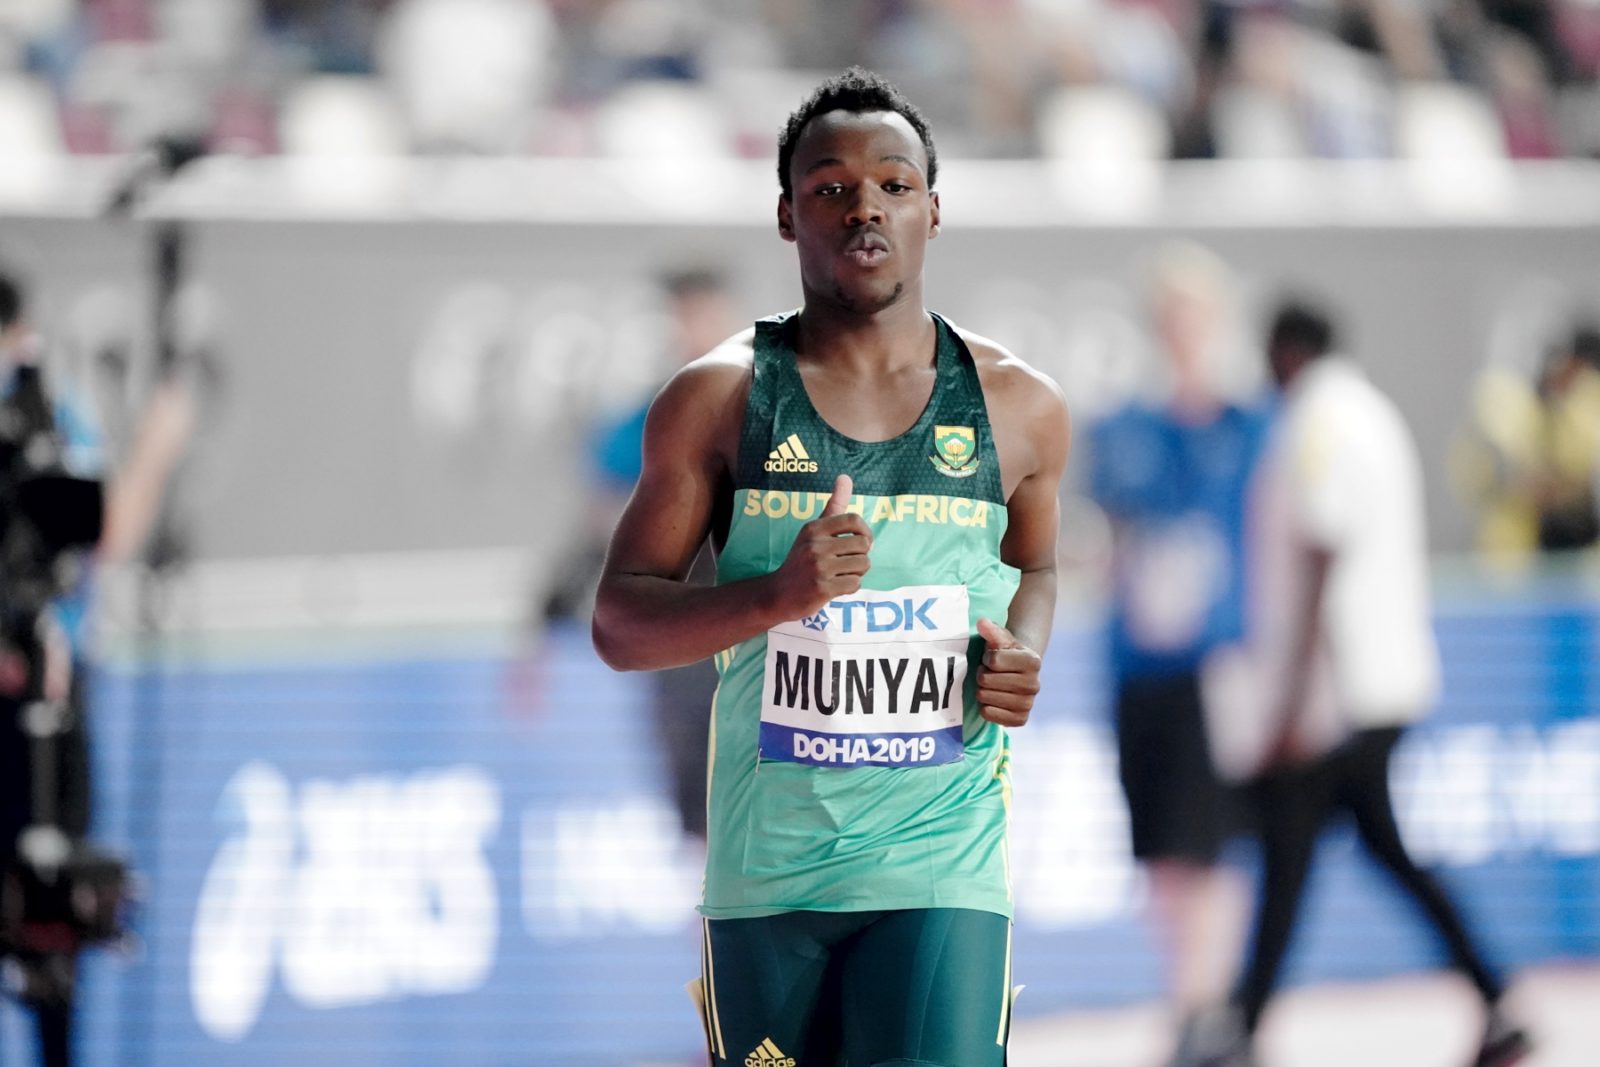 South Africa's Clarence Munyai during the men's 200m in Doha / Photo credit: Getty Images for IAAF